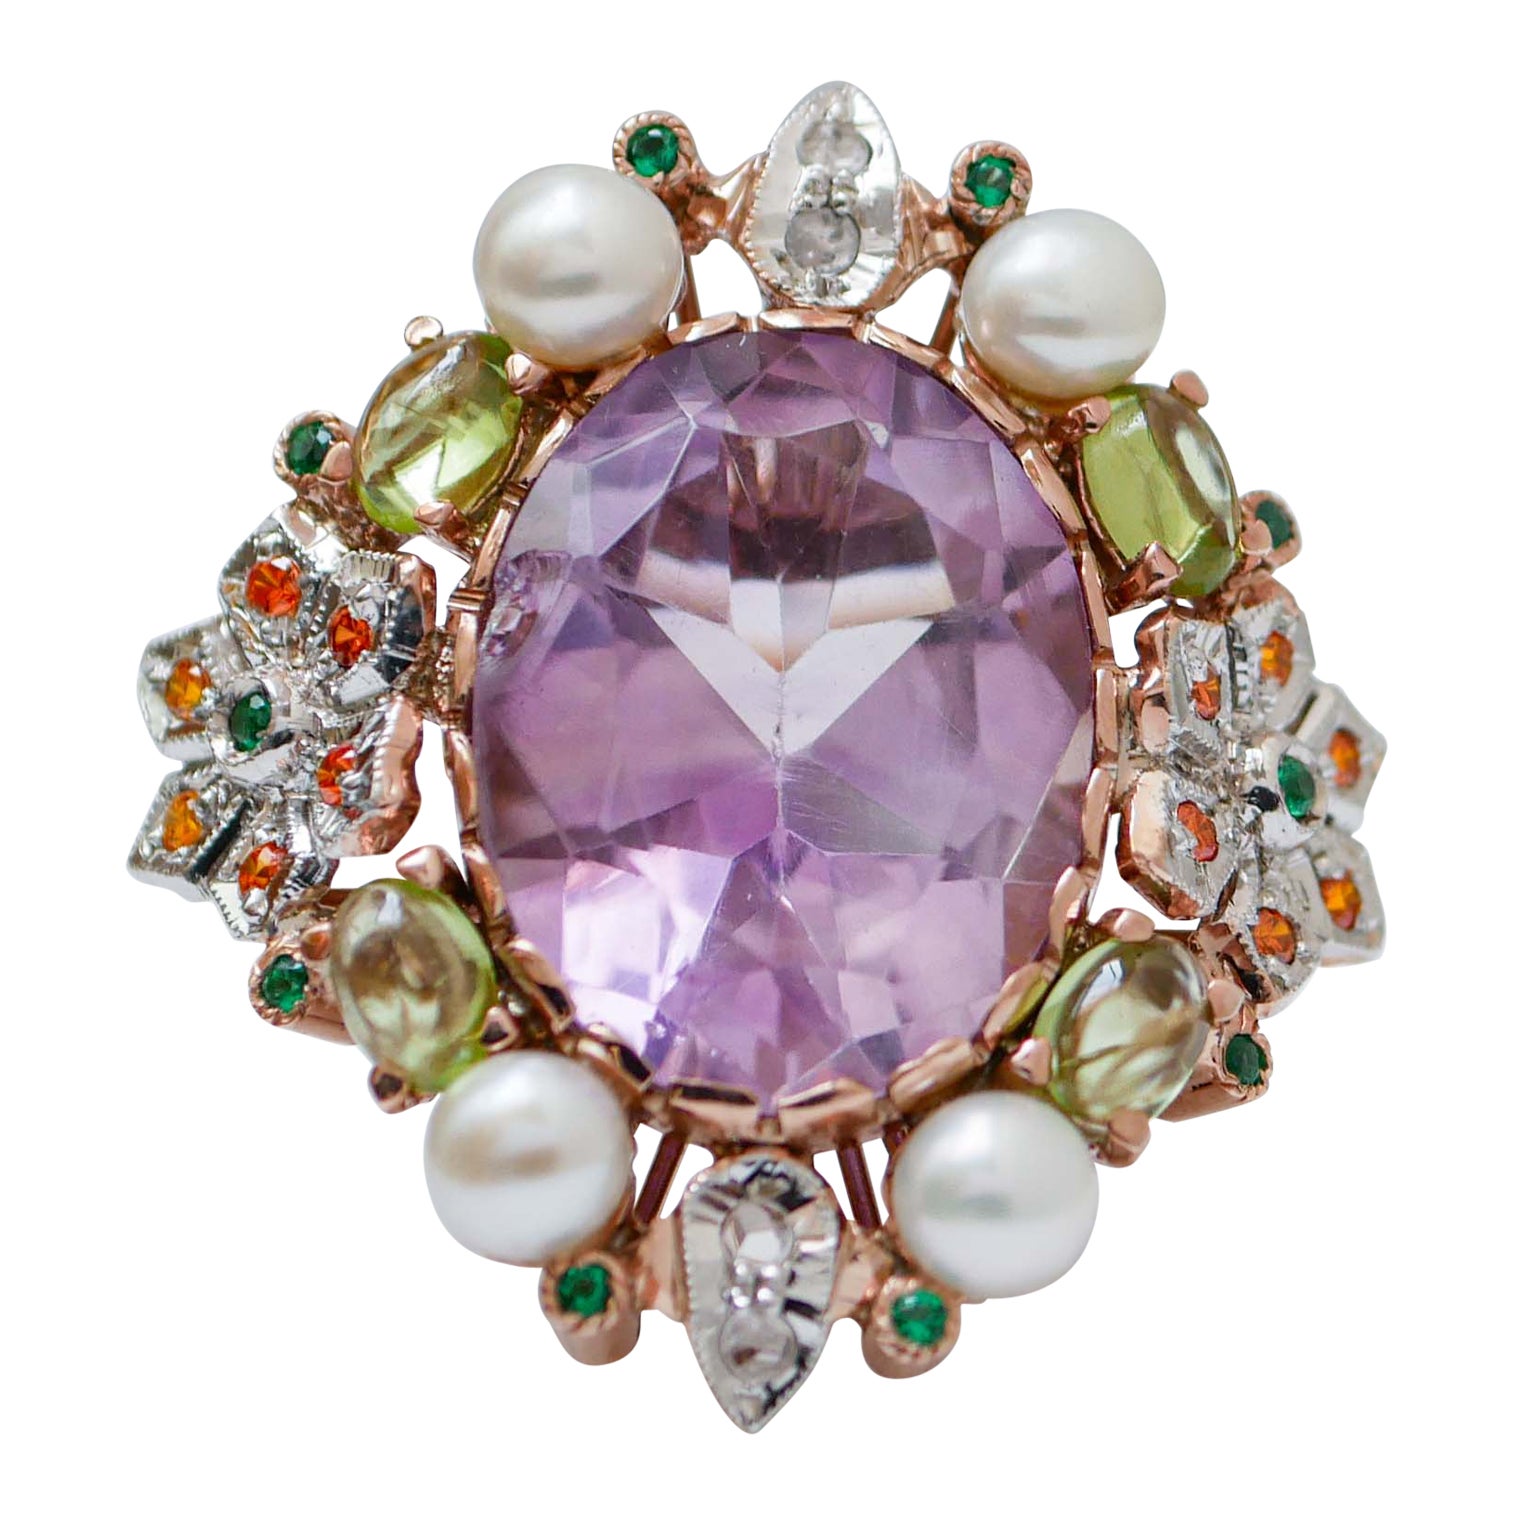 Amethyst, Peridots, Pearls, Stones,  Diamonds, Rose Gold and Silver  Ring. For Sale